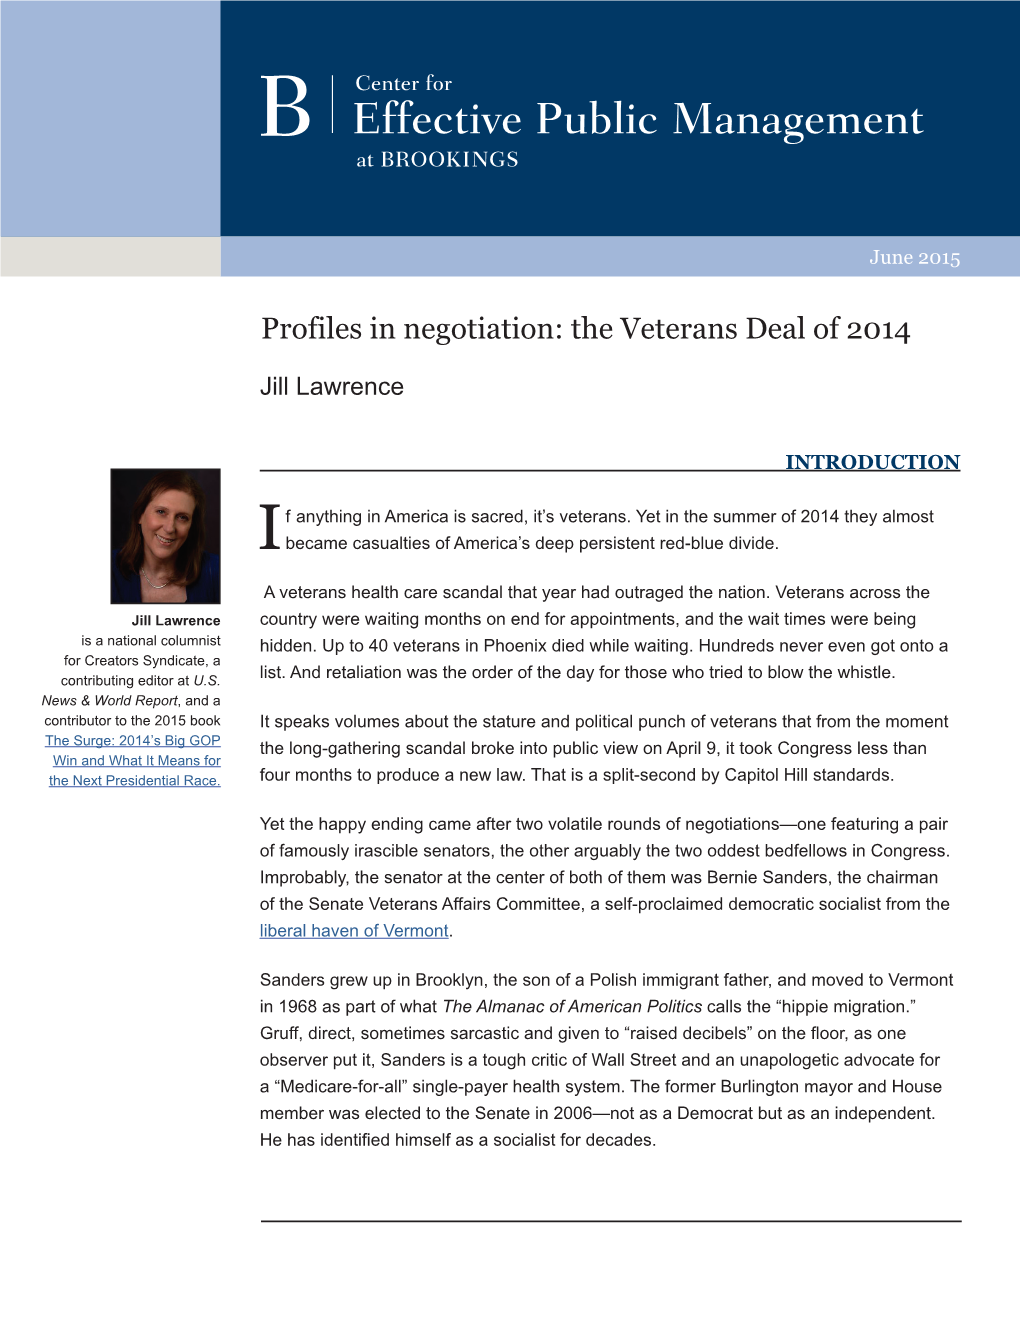 The Veterans Deal of 2014